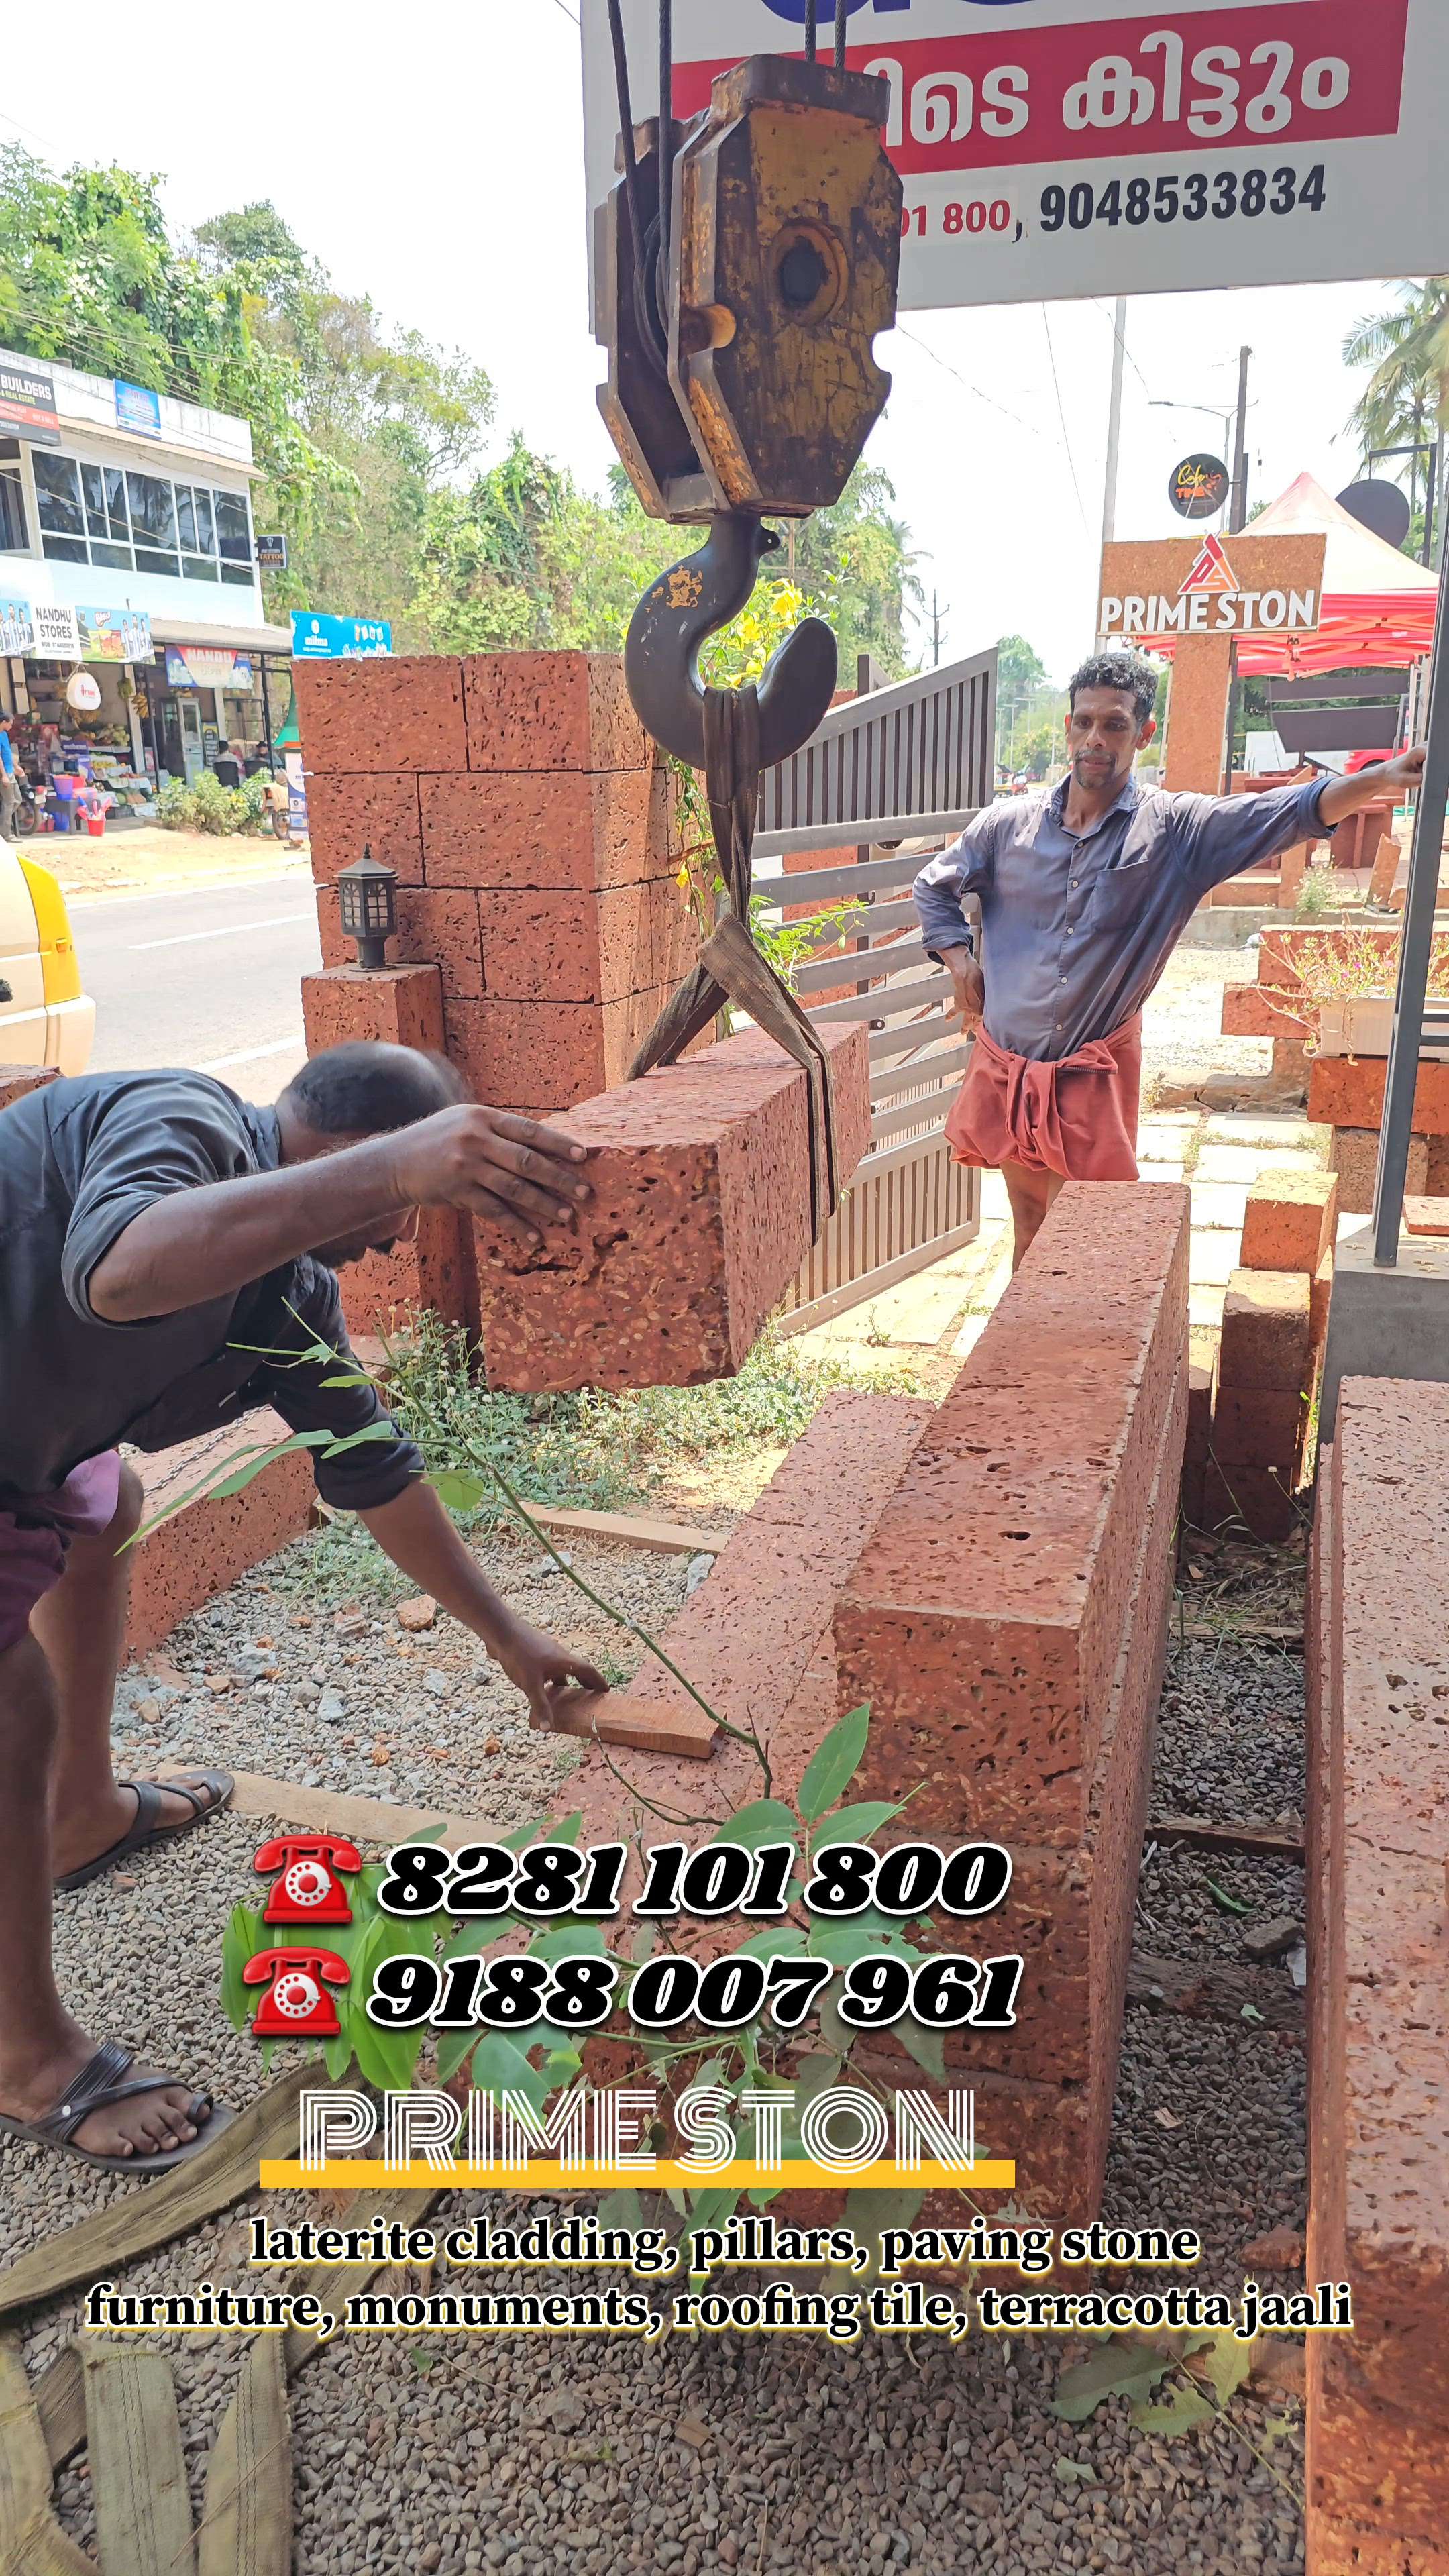 PRIME STON❤️
The king of laterite

LateriteCladdingTiles #LateriteFlooringSlabs #LateritePavingStones #LateriteFurniture's #LateriteMonuments #LateriteSinglePillars ...

💚100% Natural Laterite Stone Products Manufacturer & laying contractor 💚

OUR SERVICES AVAILABLE ALLOVER INDIA 

Cladding available Sizes....
12/6,12/7,15/9,18/9,21/9,24/9 inches 20 mm thickness...

Paving available sizes....
12×12, 18×18, 24×24 inches 50 mm thickness

Slabs available sizes....
6/2 feet 25mm, 40 mm, 50 mm, 100 mm

Pillars available sizes..
From 24×6×6 to 7×12×12 feet 

Laterite furnitures and customized sizes also available...

Contact - 9048 533 834, 8848 88 3600, 8281 101 800
 

primelaterite@gmail.com 
www.primestone.co.in
 #lateritefurniture #lateritemonuments #lateritesinglepillars #lateriteexteriorpaving #bestlaterite